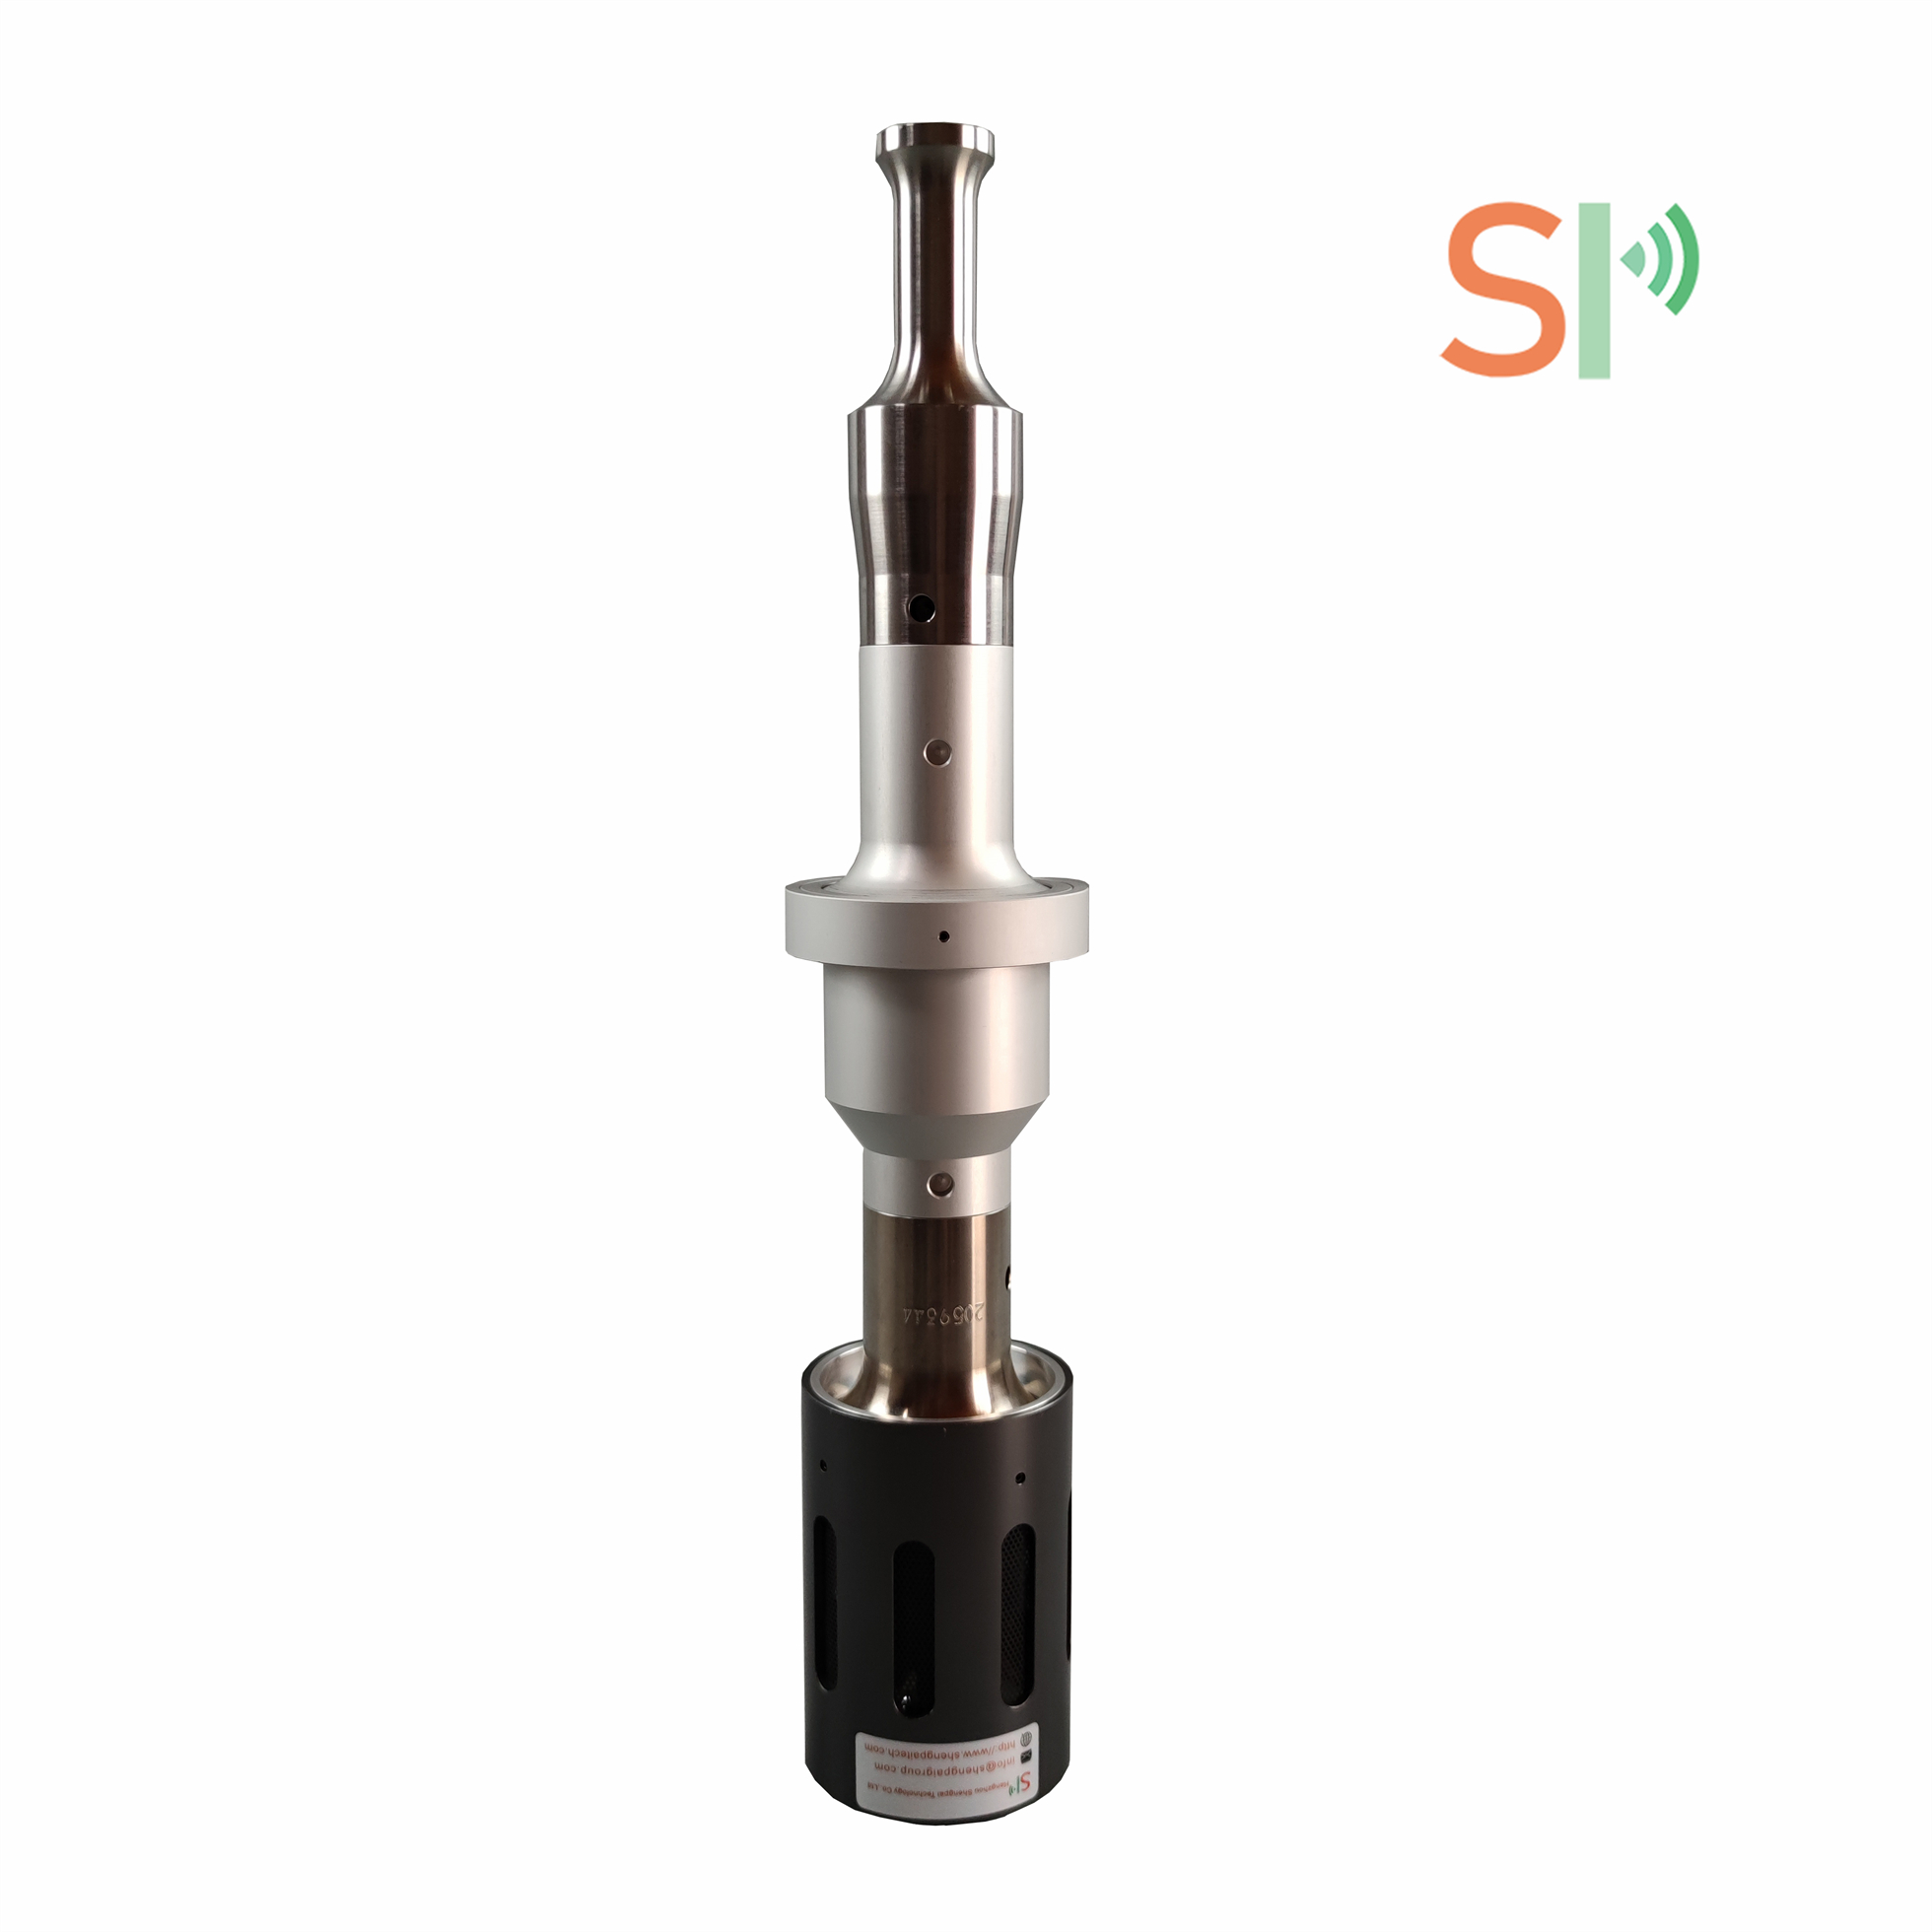 Top Quality Low Price Ultrasonic Homogenizer For Herbs Extraction